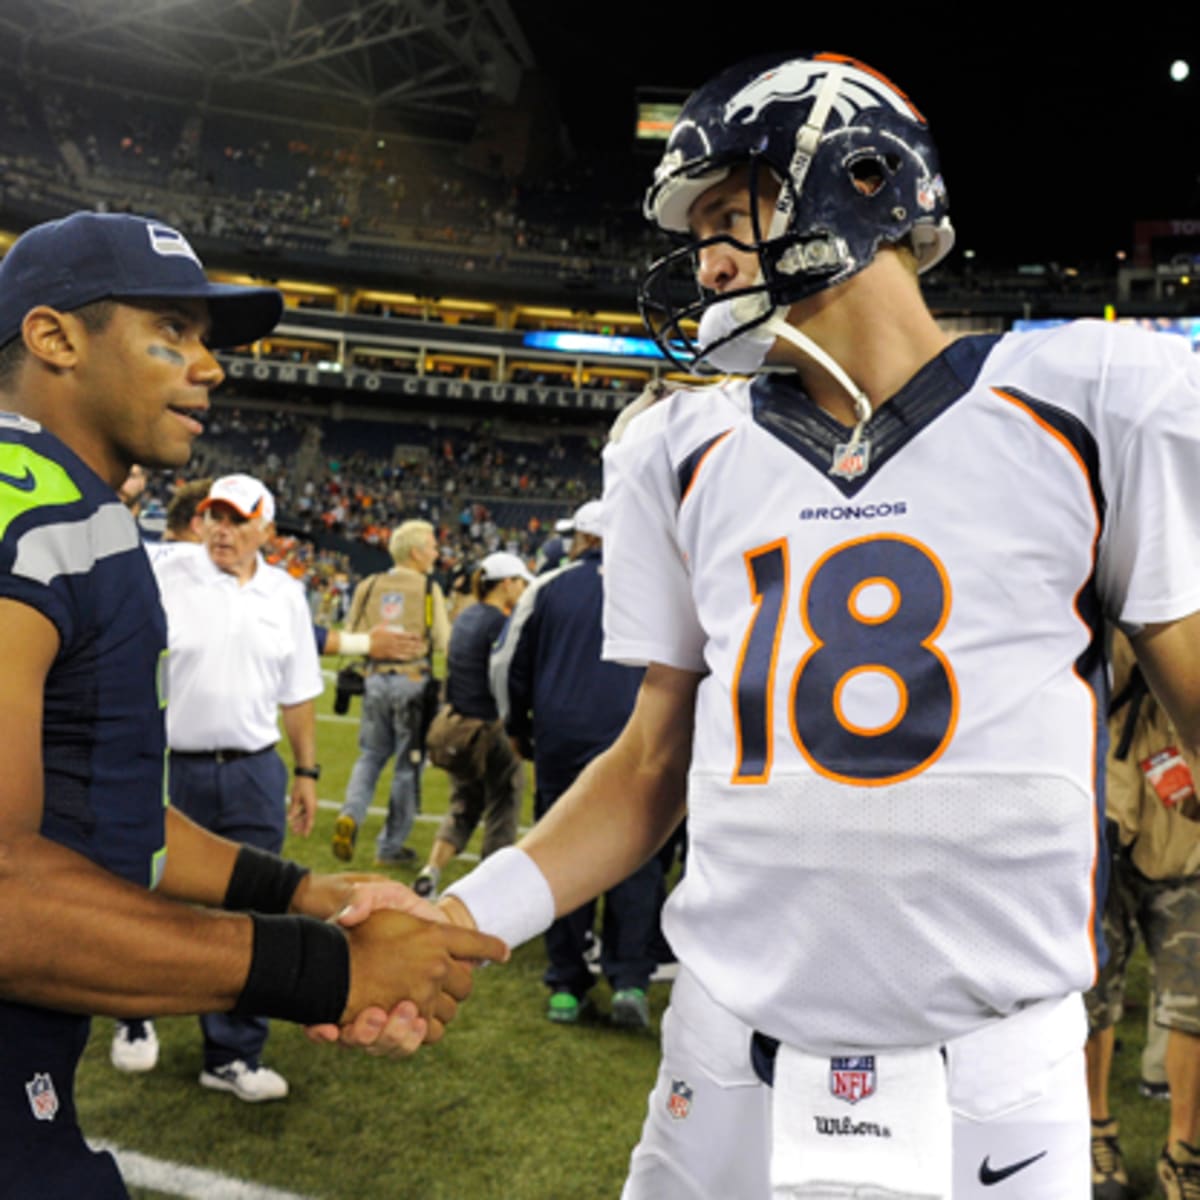 Russell Wilson, Peyton Manning visit Coors Field